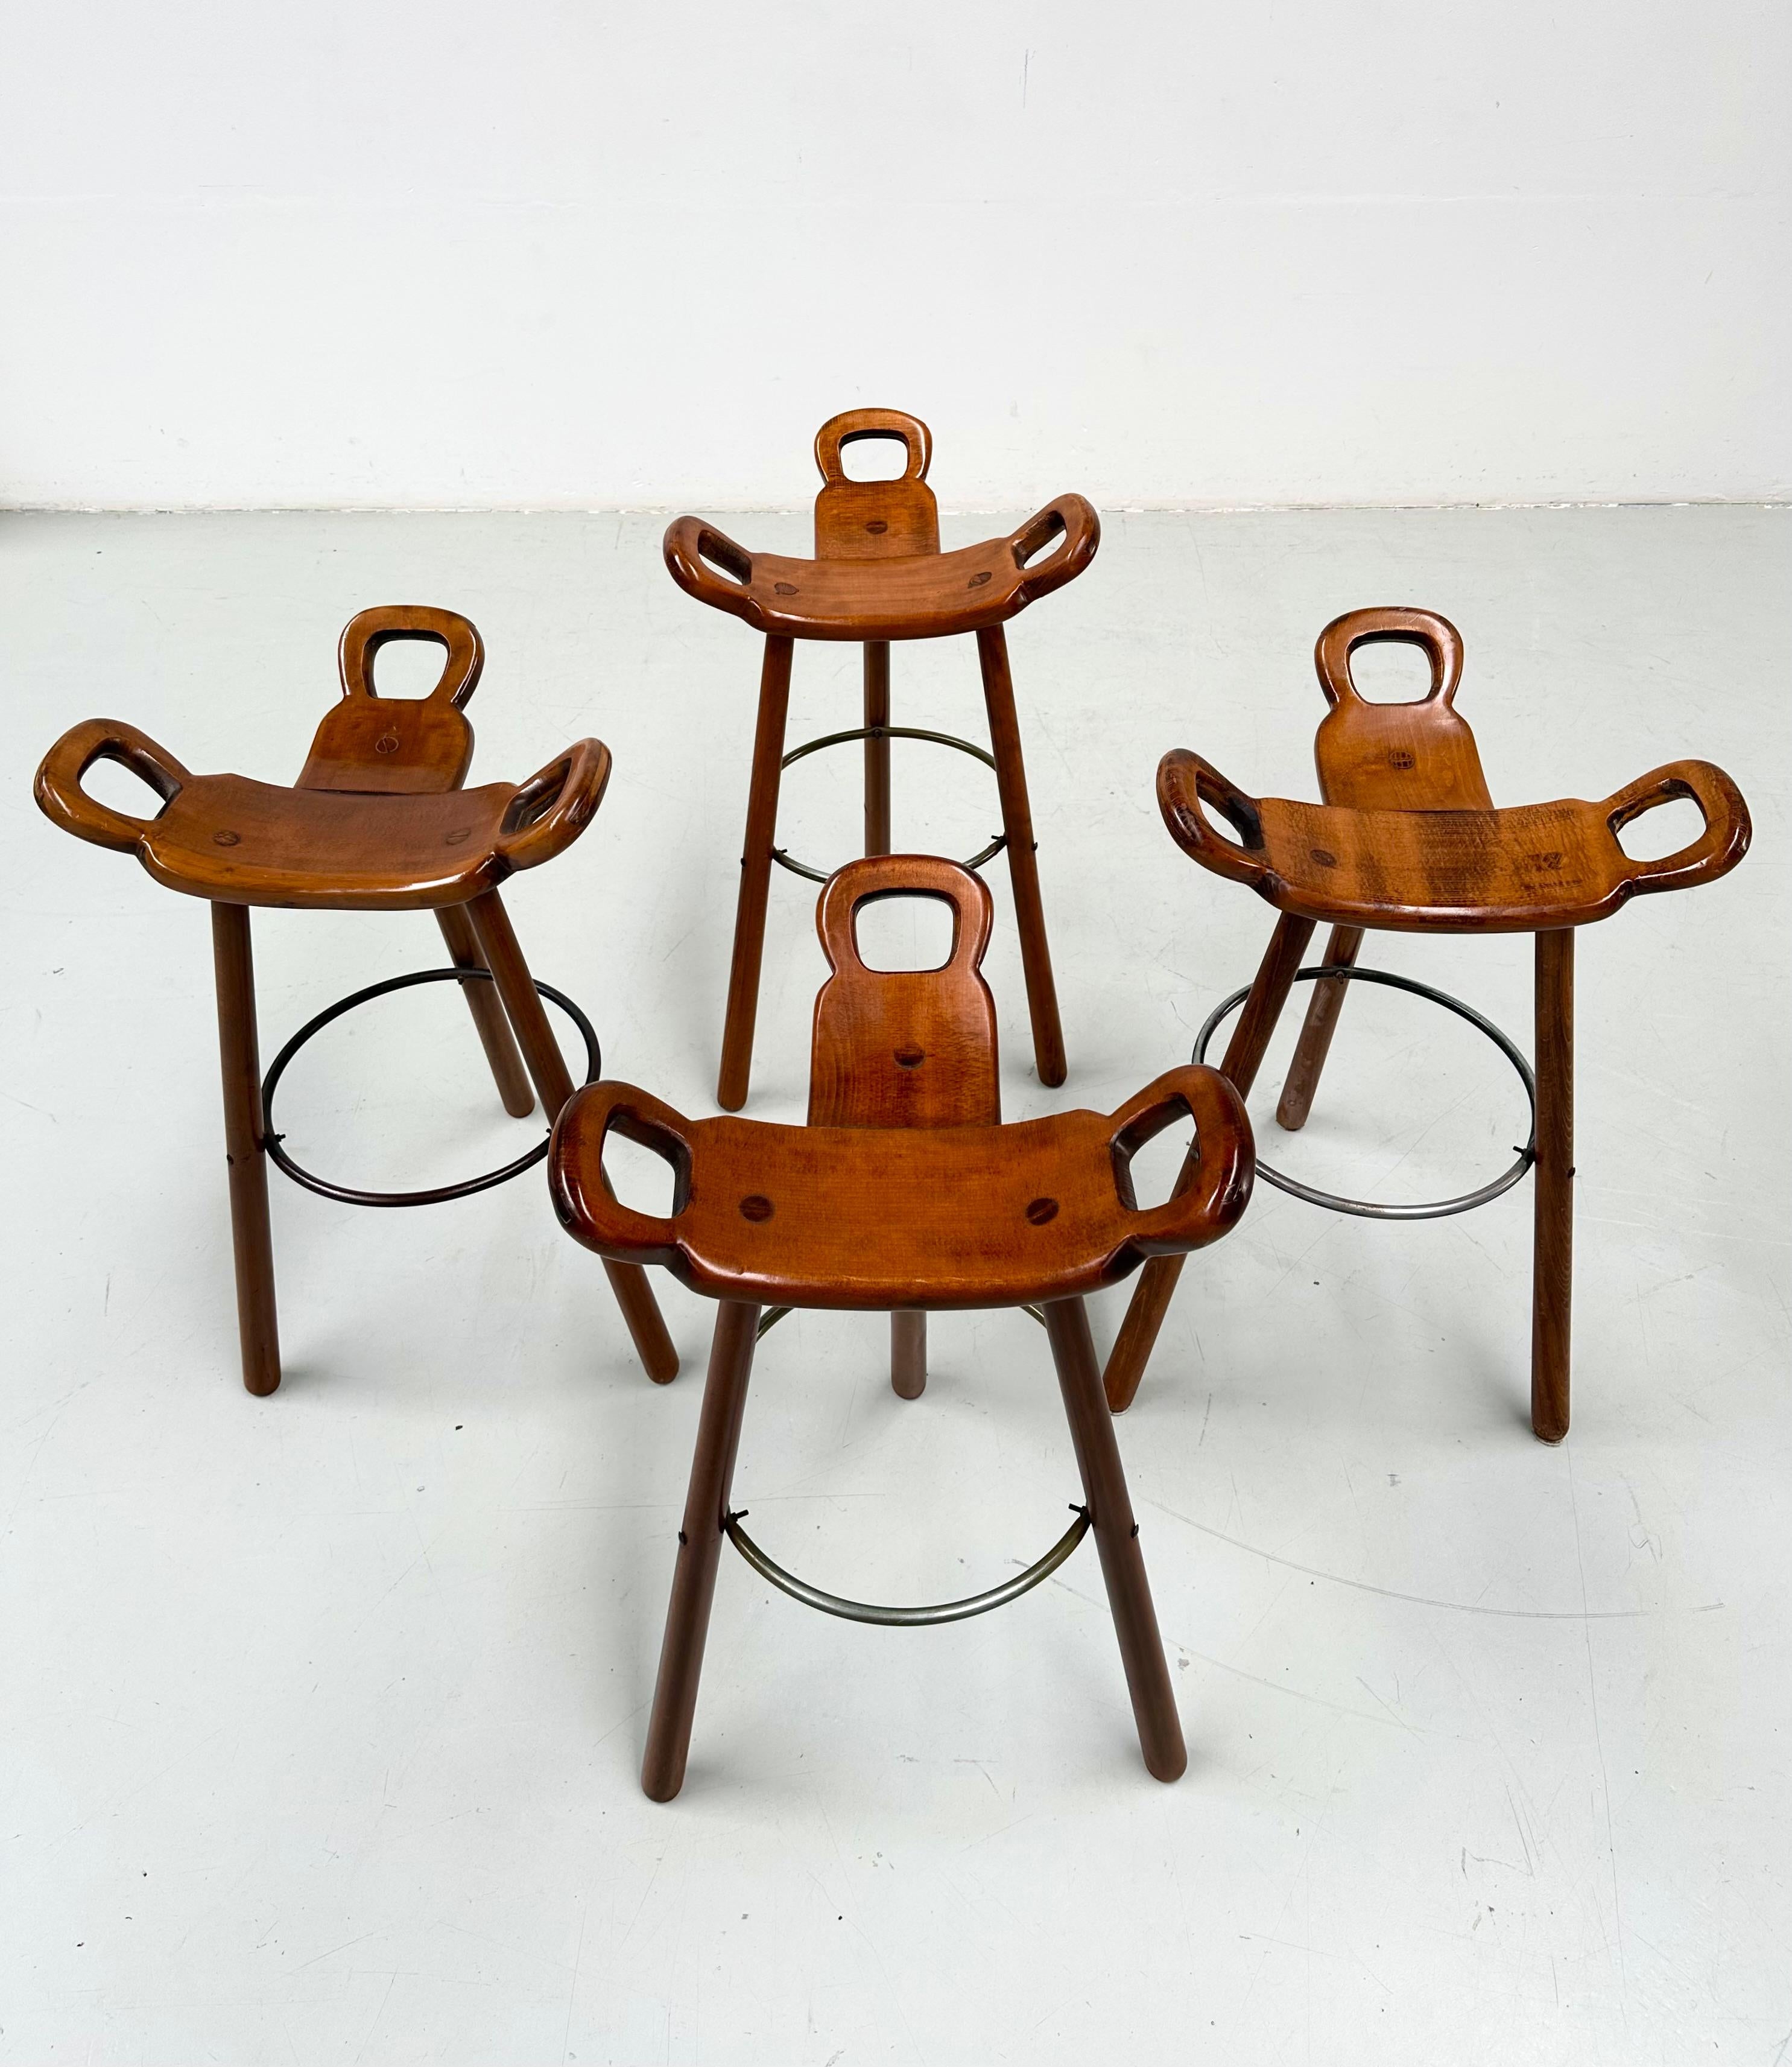 Set of 4 Marbella Brutalist Stools by Sergio Rodrigues for Confonorm 1970s. 9